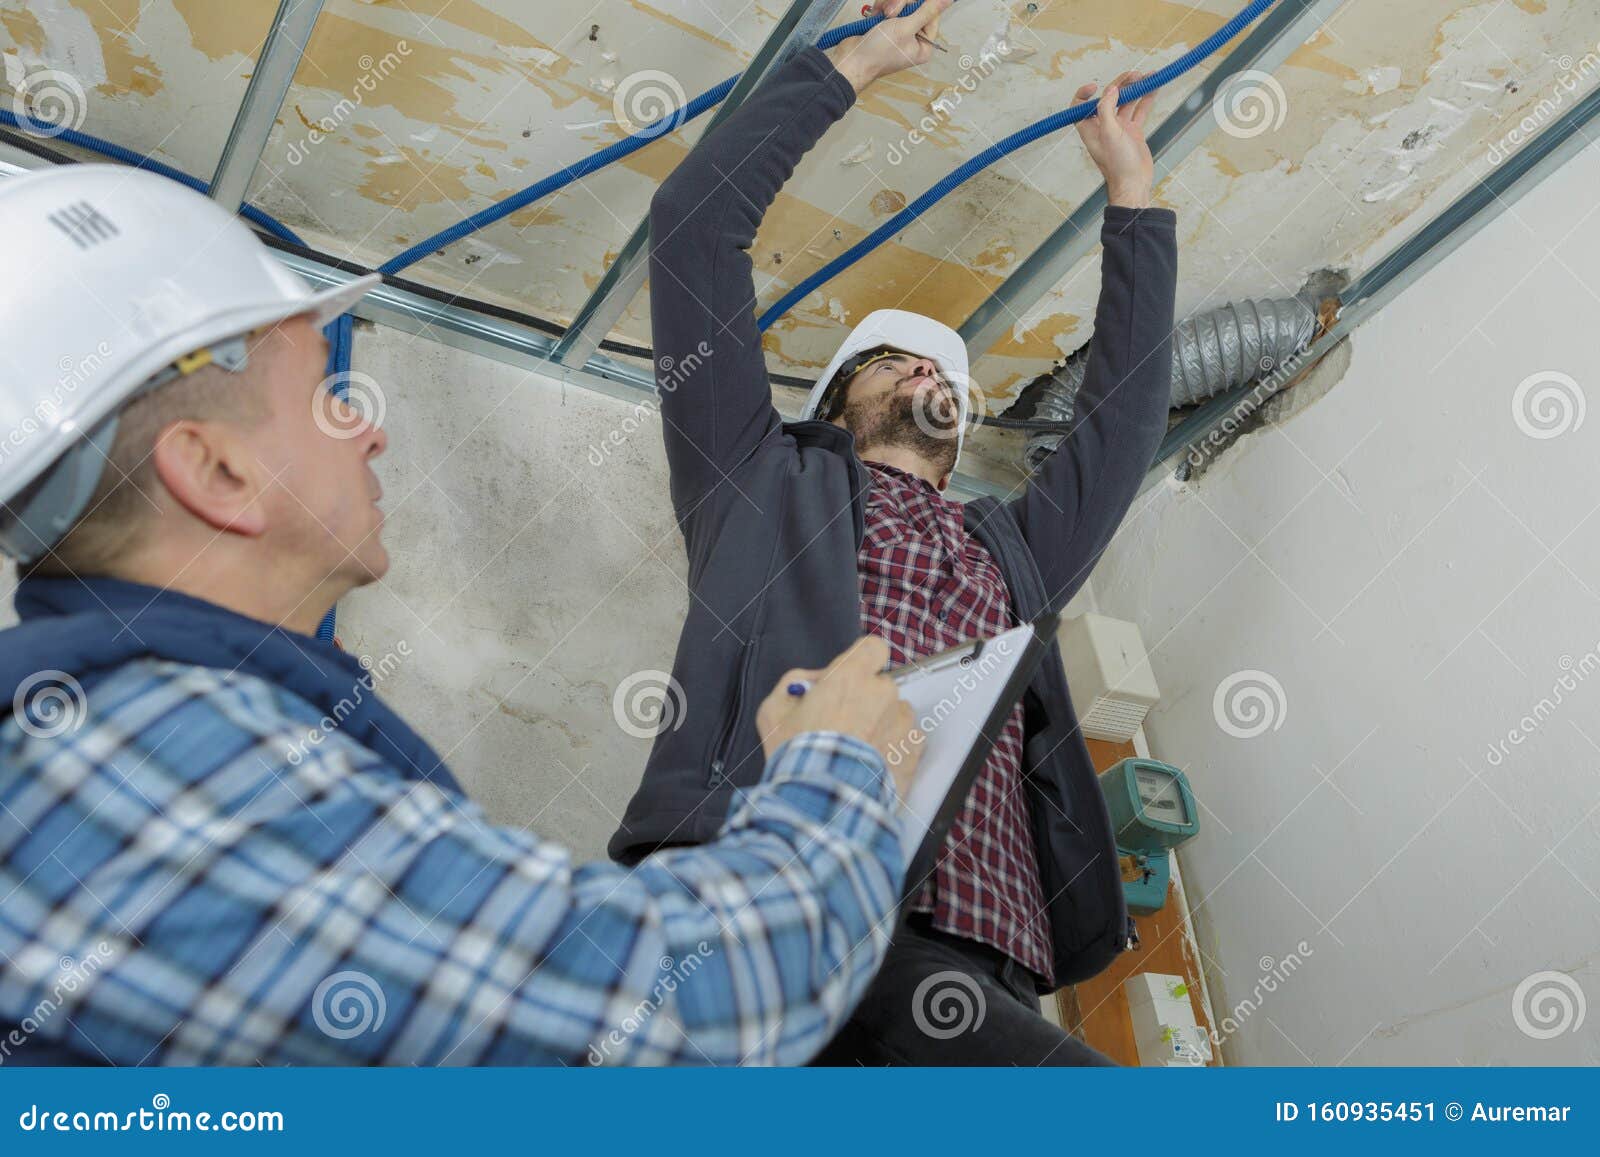 Builders Putting Or Repairing Up Suspended Ceiling Stock Image